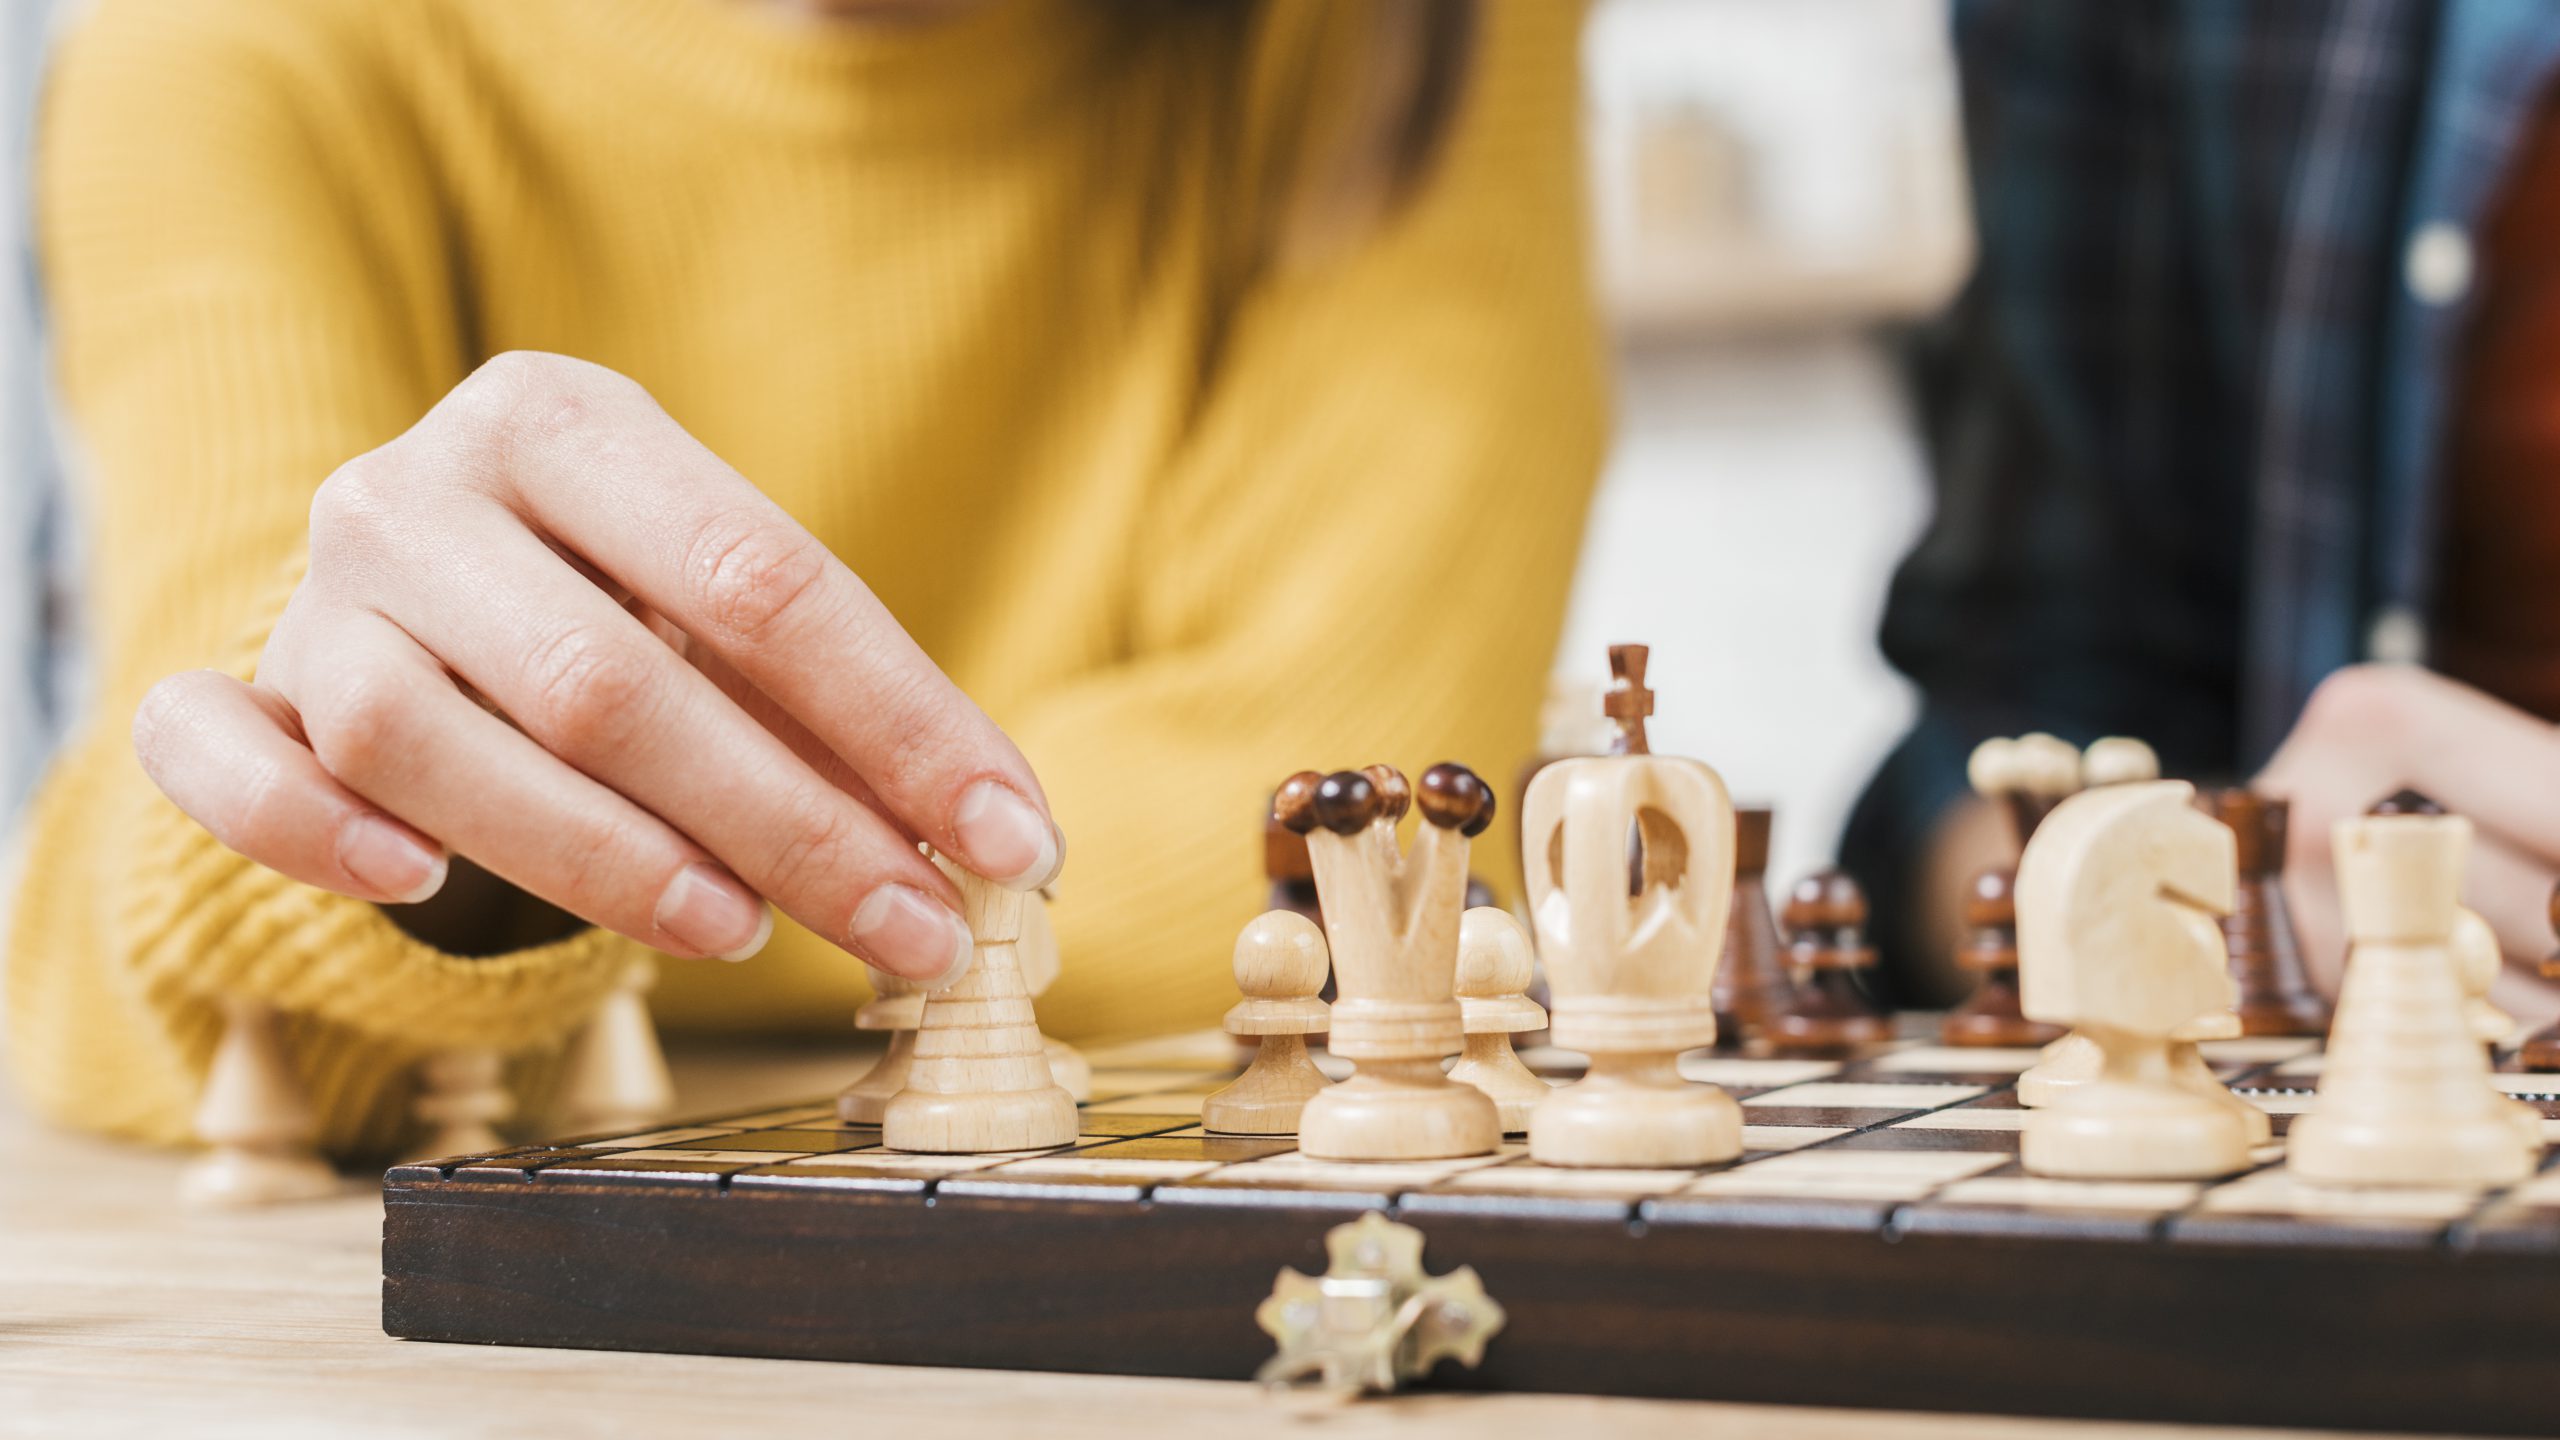 close-up-young-woman-playing-chess-board-game